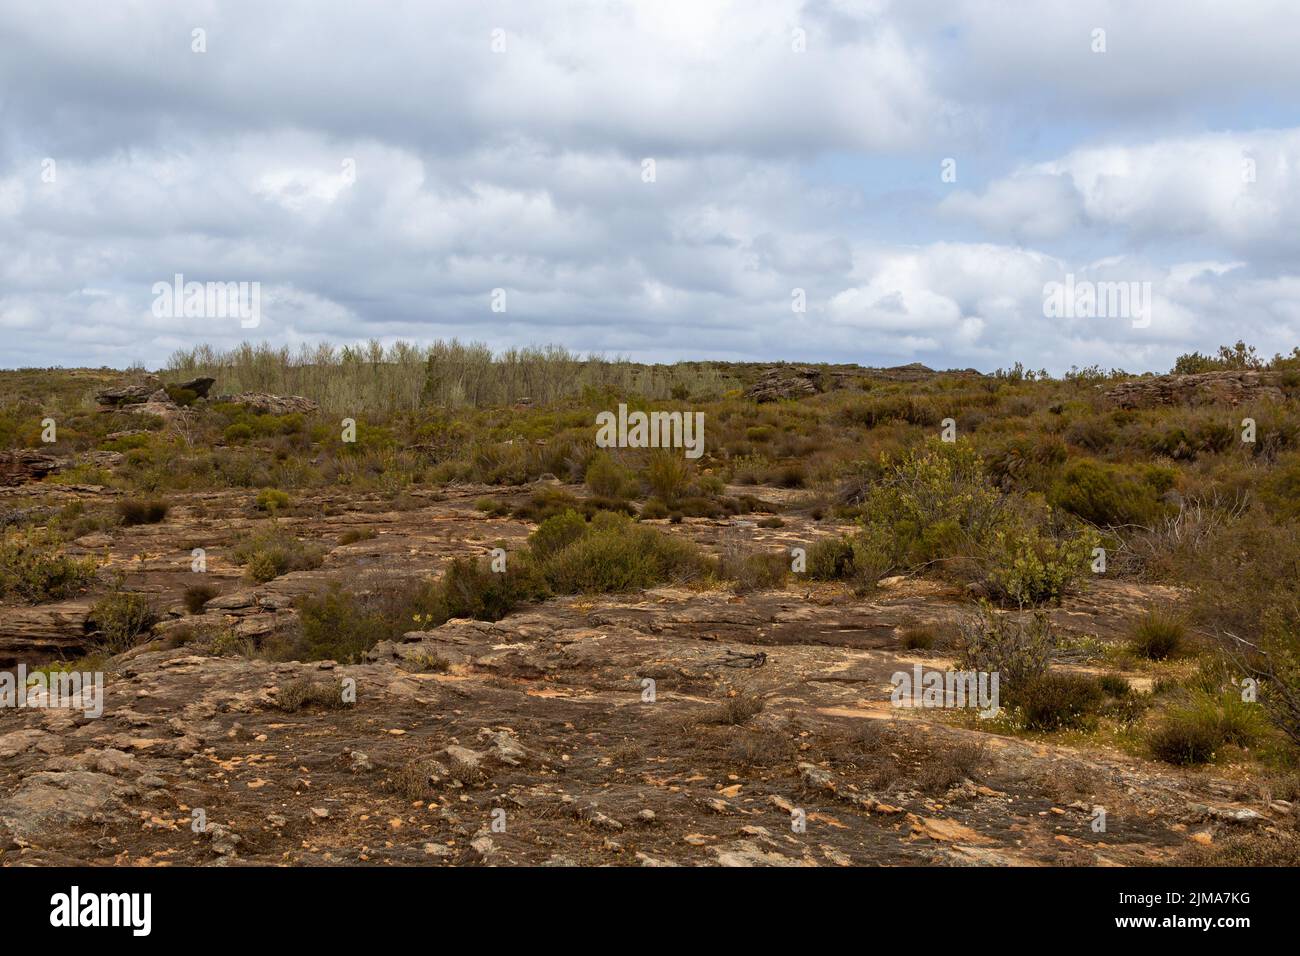 Stony Landscape of the Bokkeveld Plateau in the Northern Cape of South Africa Stock Photo